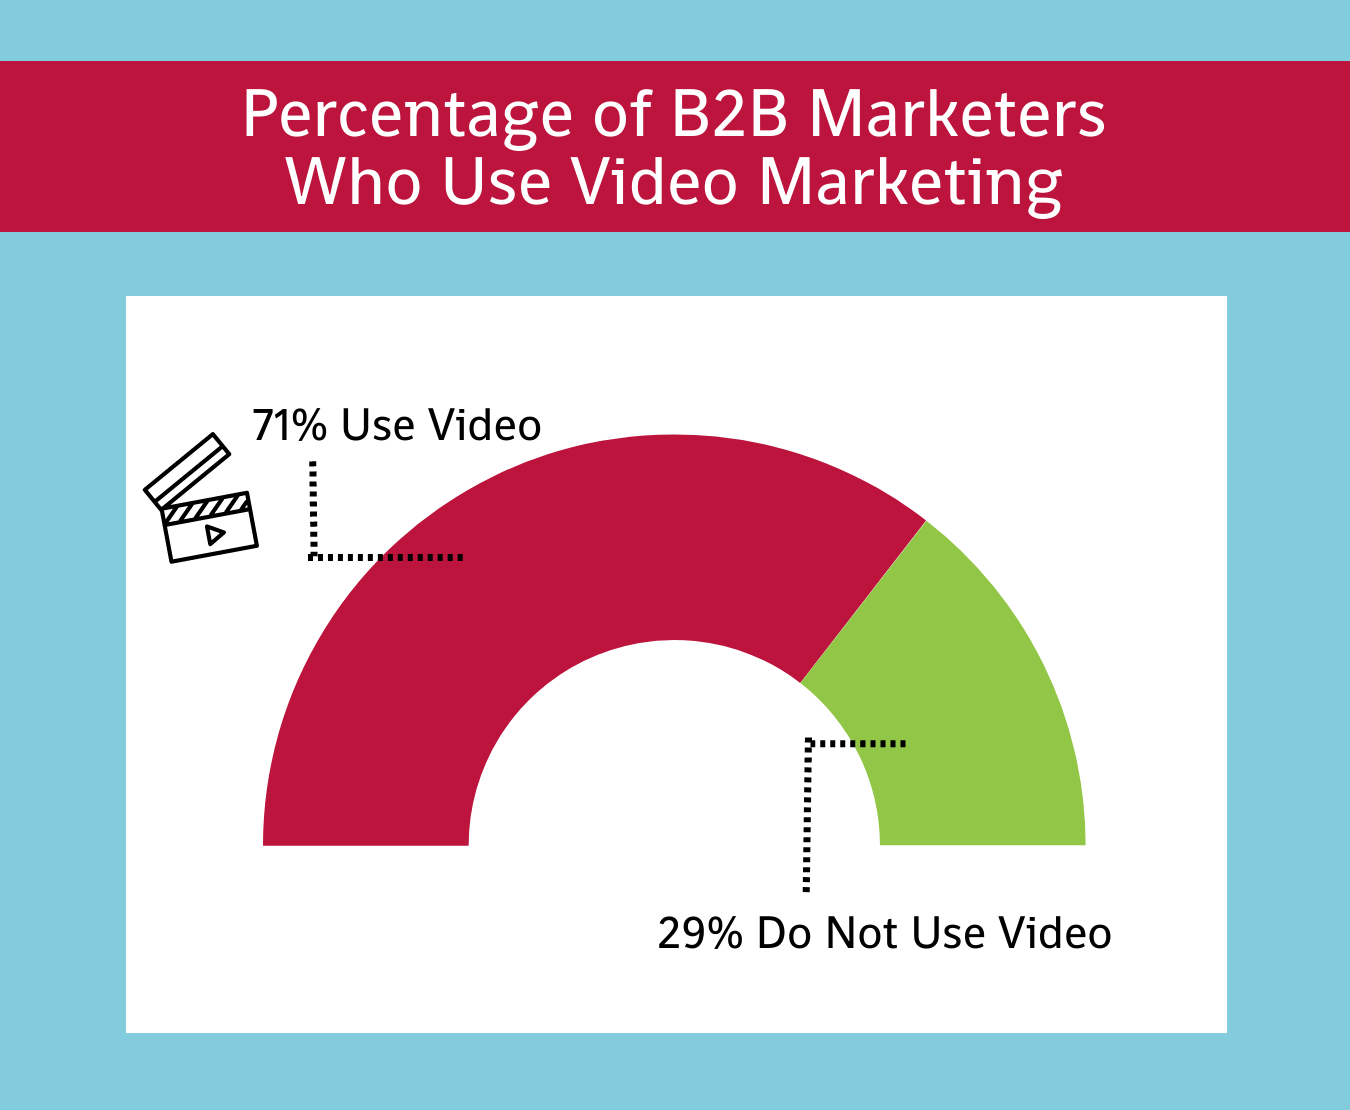 making better B2B marketing videos has become more important now that 71% of B2B marketers use video marketing